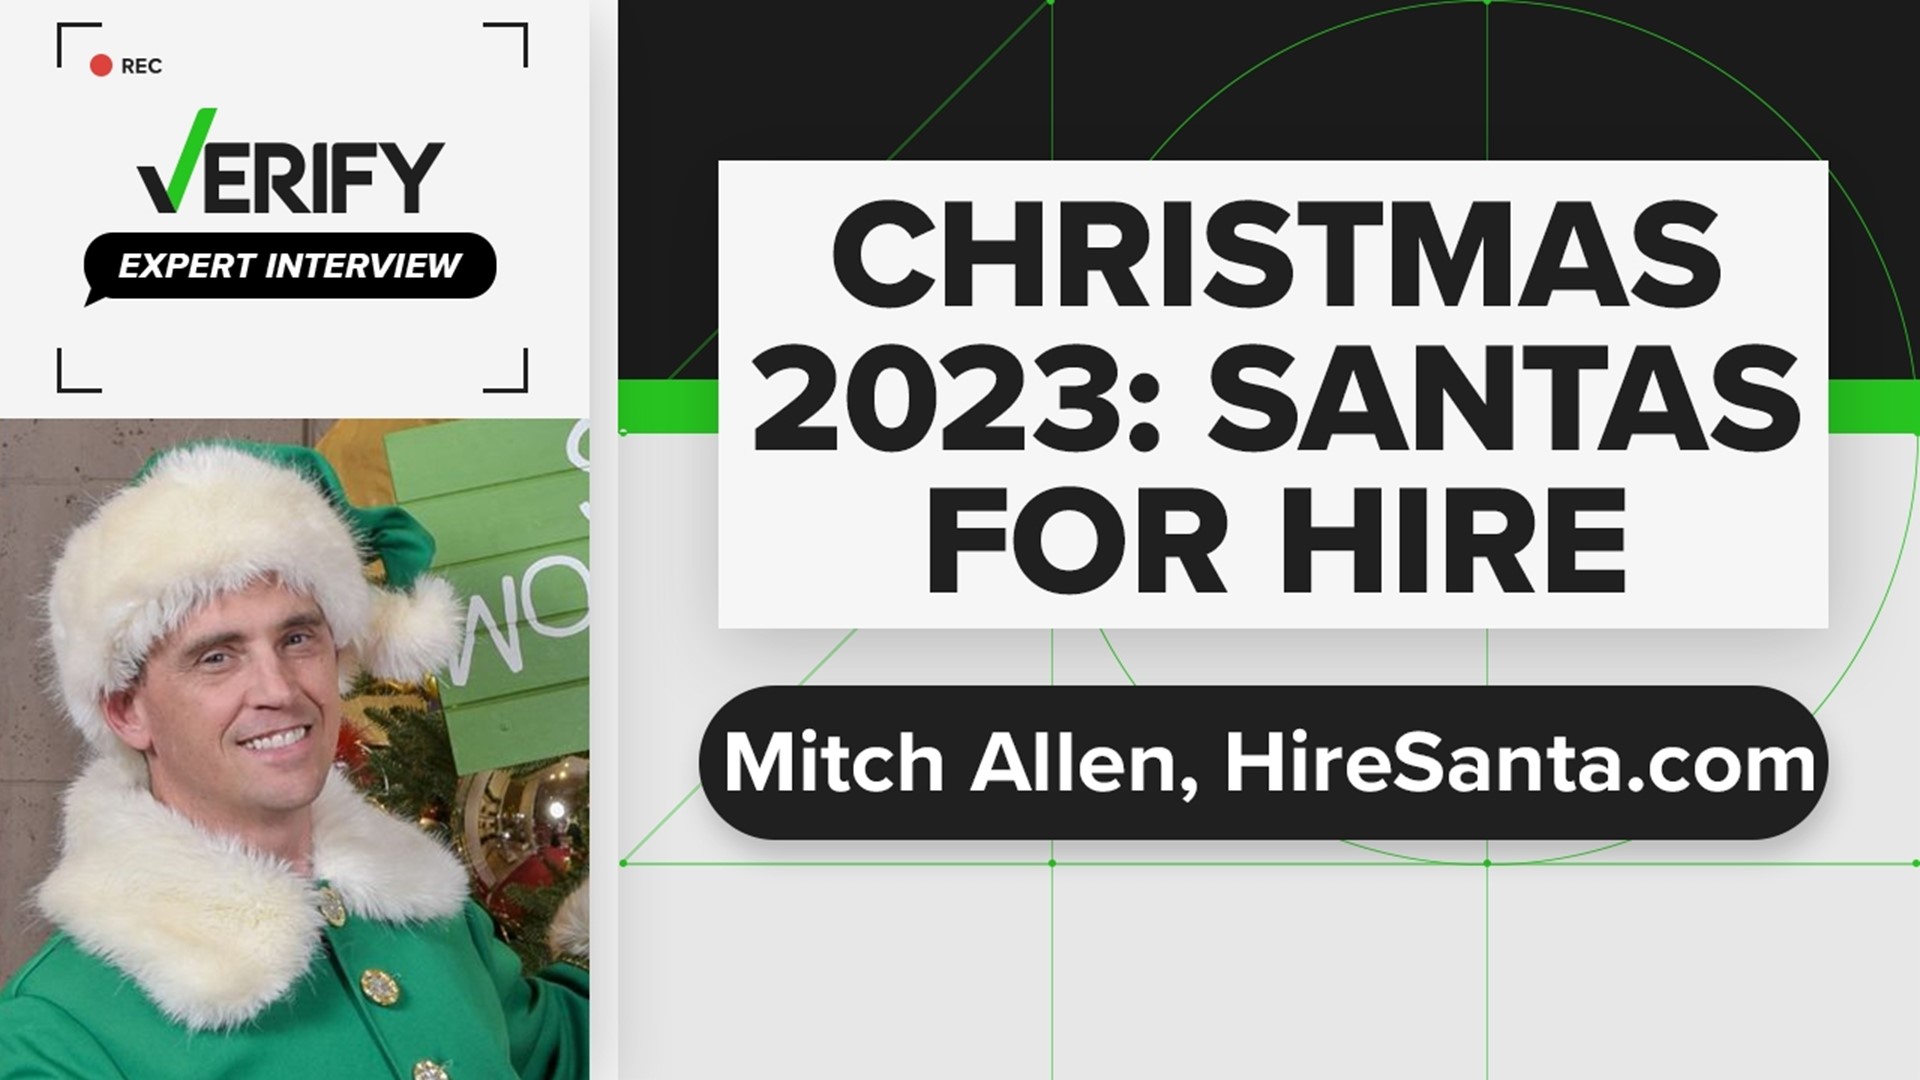 Mitch Allen is the founder of hiresanta.com and explains the business of being Santa every Christmas.